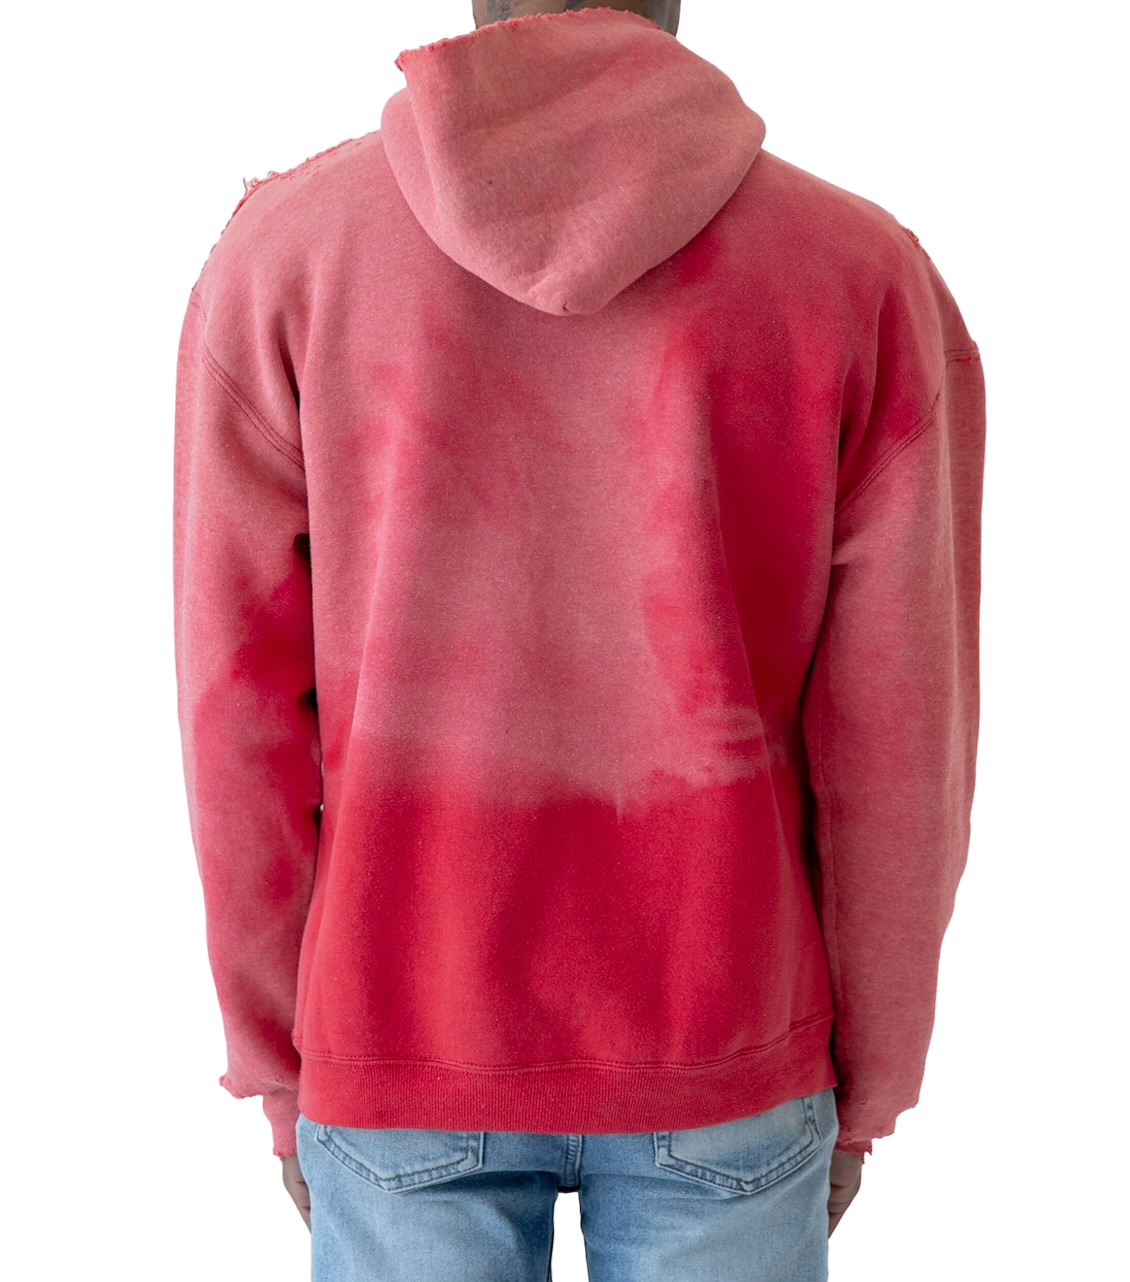 PERFECTLY SUN FADED / THRASHED RED RUSSELL HOODIE - 1990's